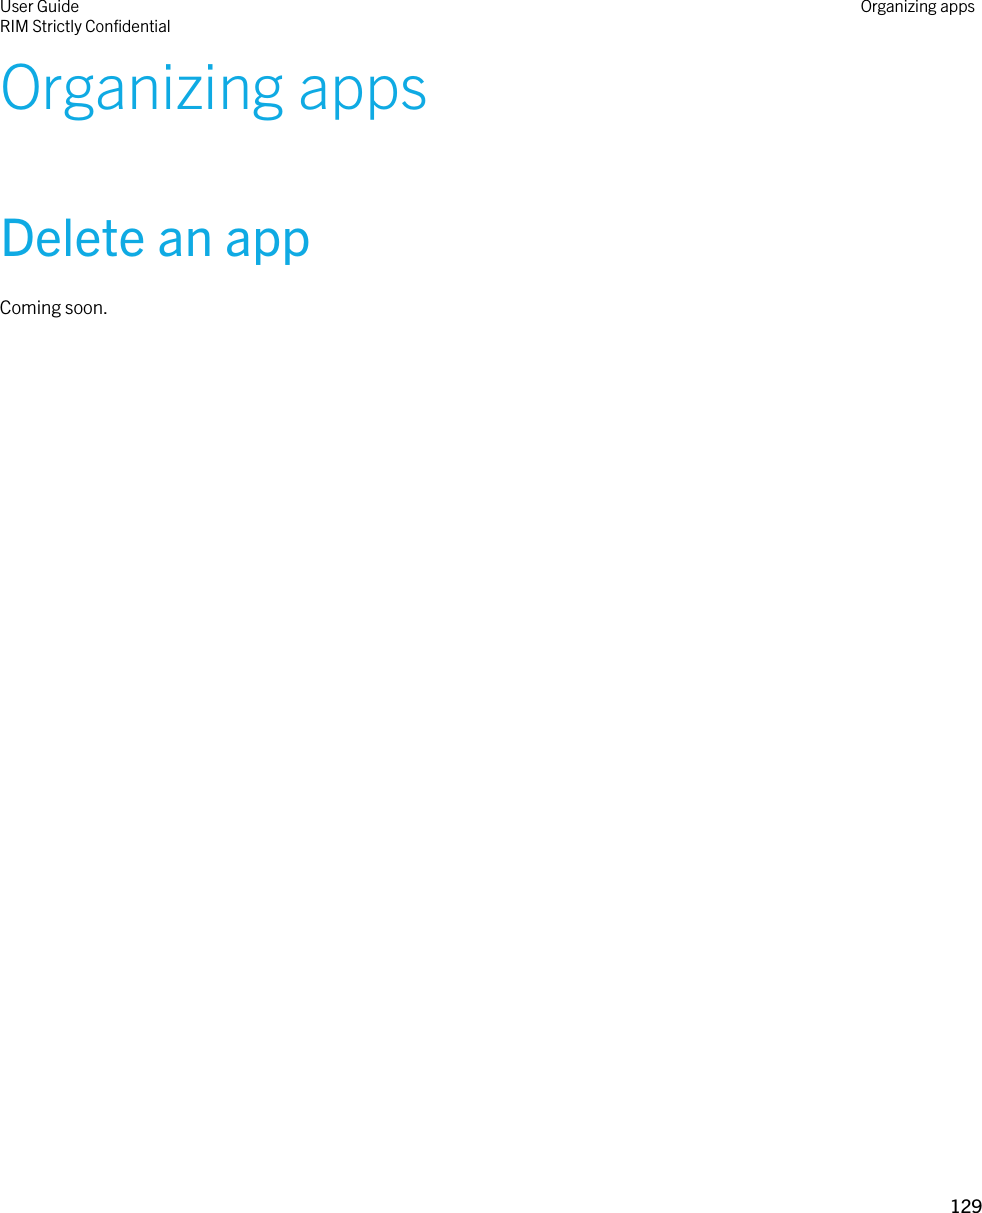 Organizing appsDelete an appComing soon.User GuideRIM Strictly ConfidentialOrganizing apps129 